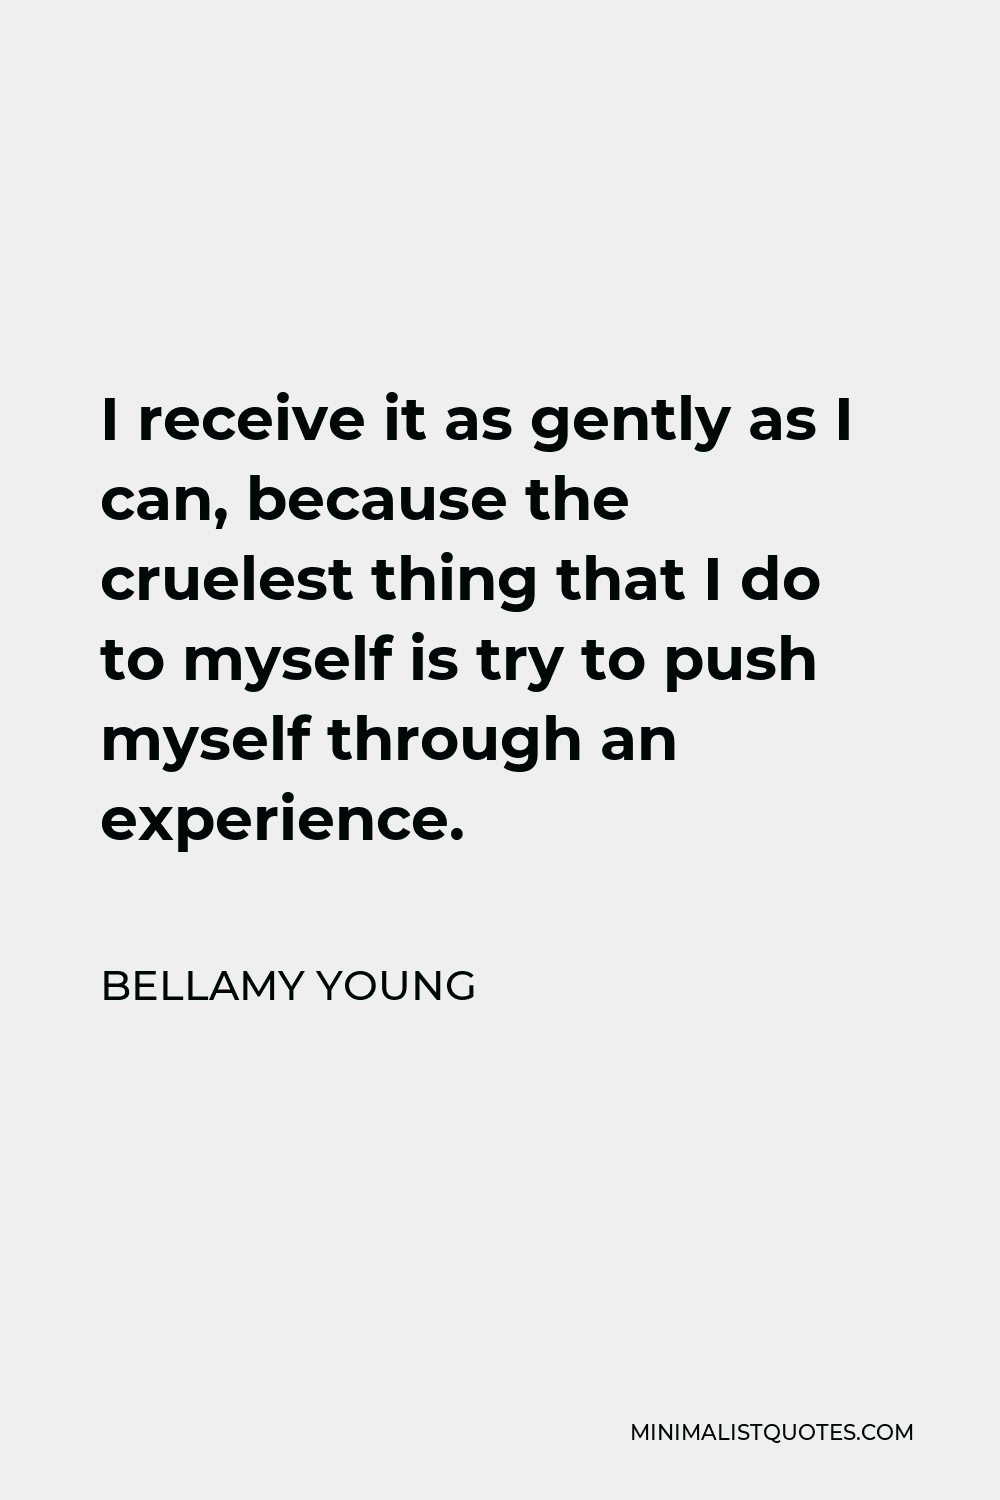 Bellamy Young Quote - I receive it as gently as I can, because the cruelest thing that I do to myself is try to push myself through an experience.